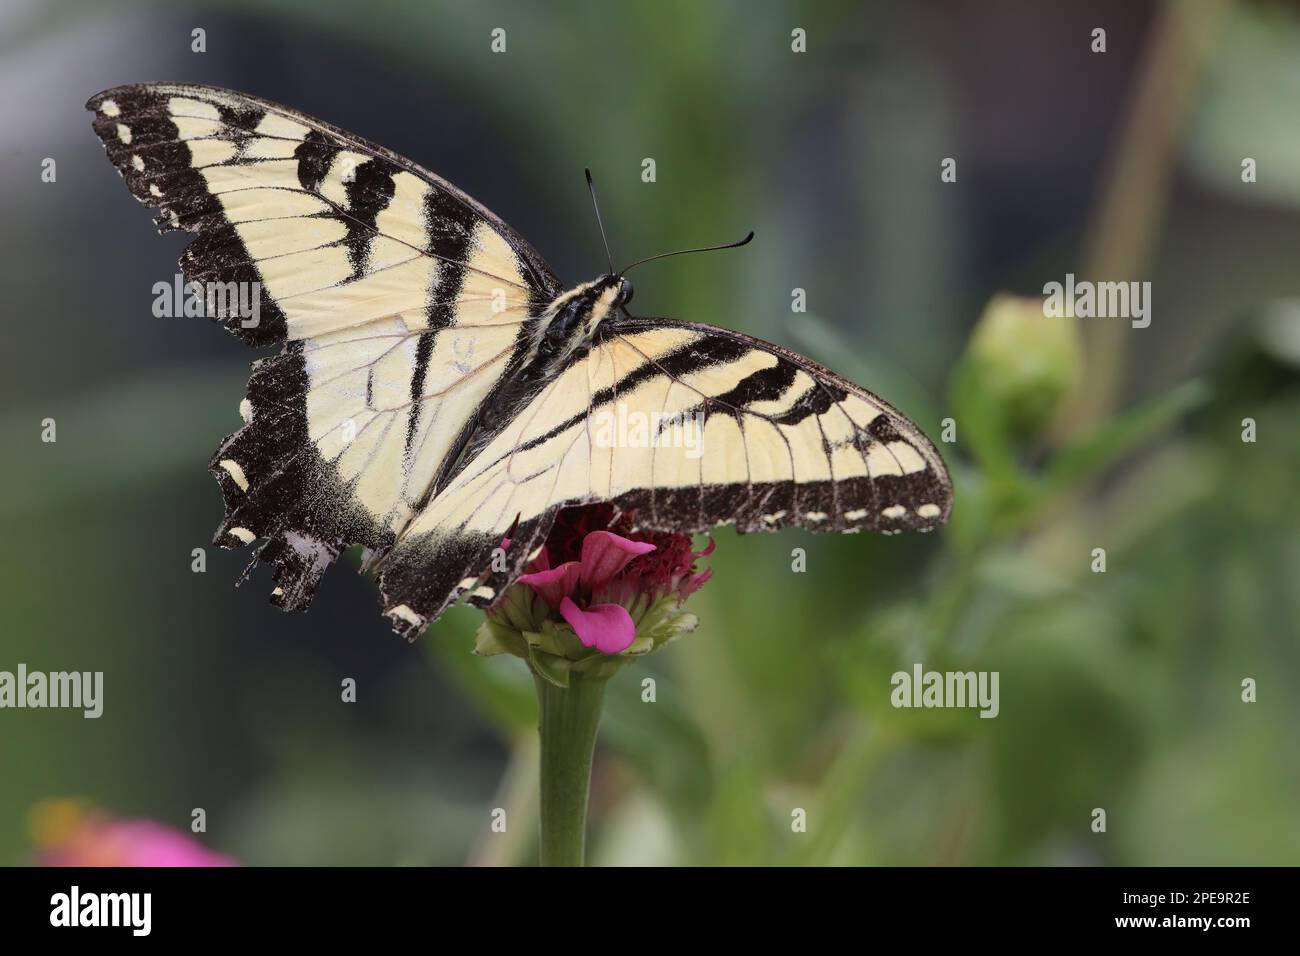 A yellow and black swallowtail butterfly spreads its wings on a pink flower. Stock Photo